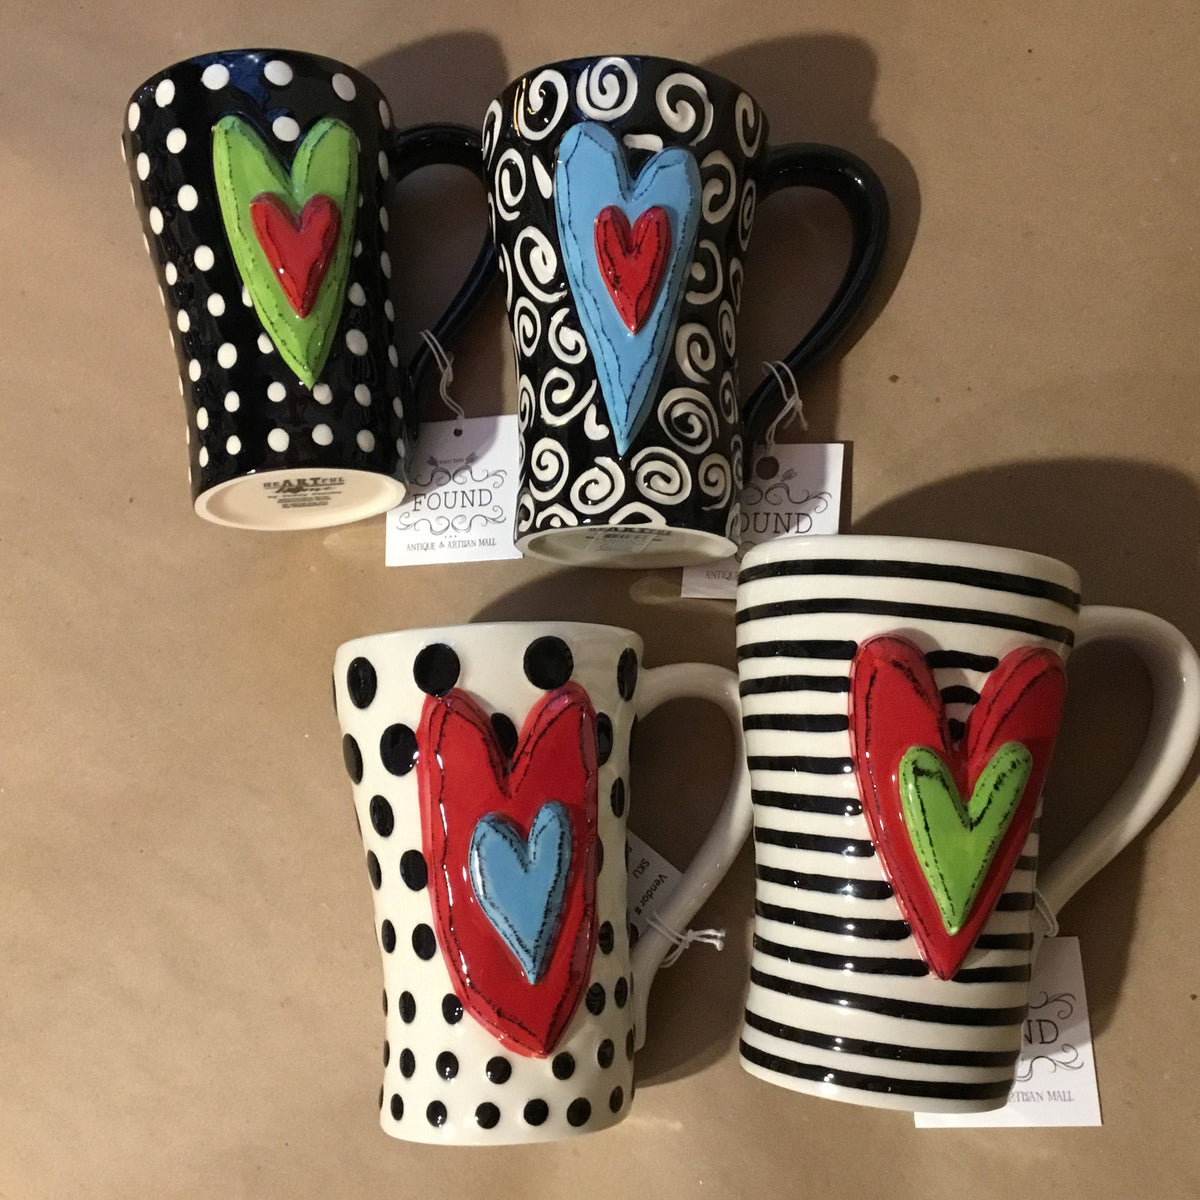 Unique, artful mugs with a cheery heart accent.